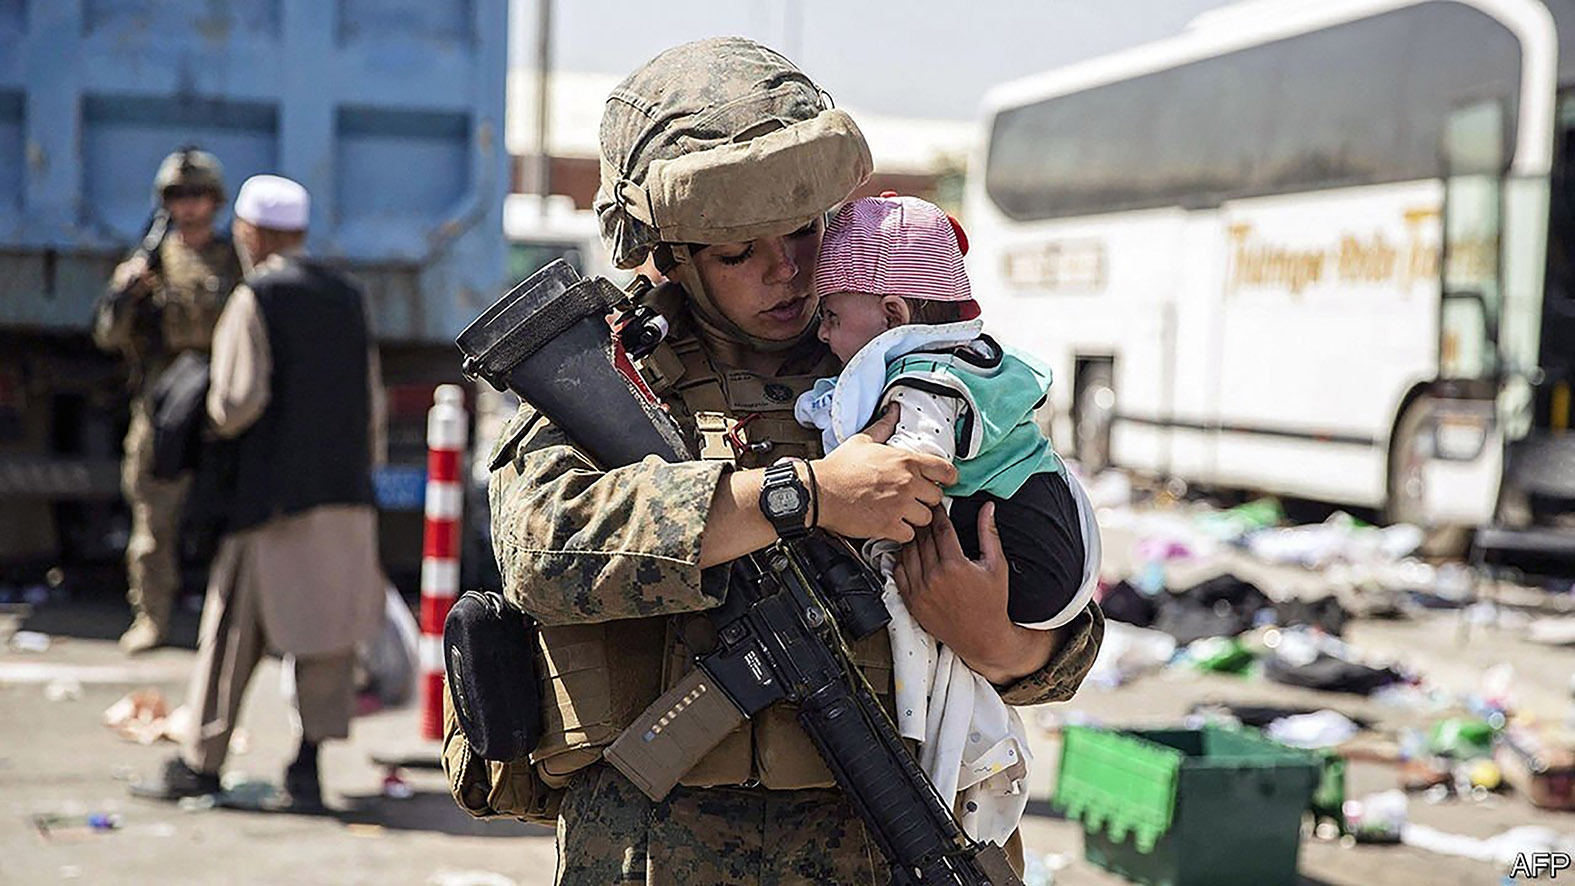 Image of a female Western soldier in field uniform holding a baby.